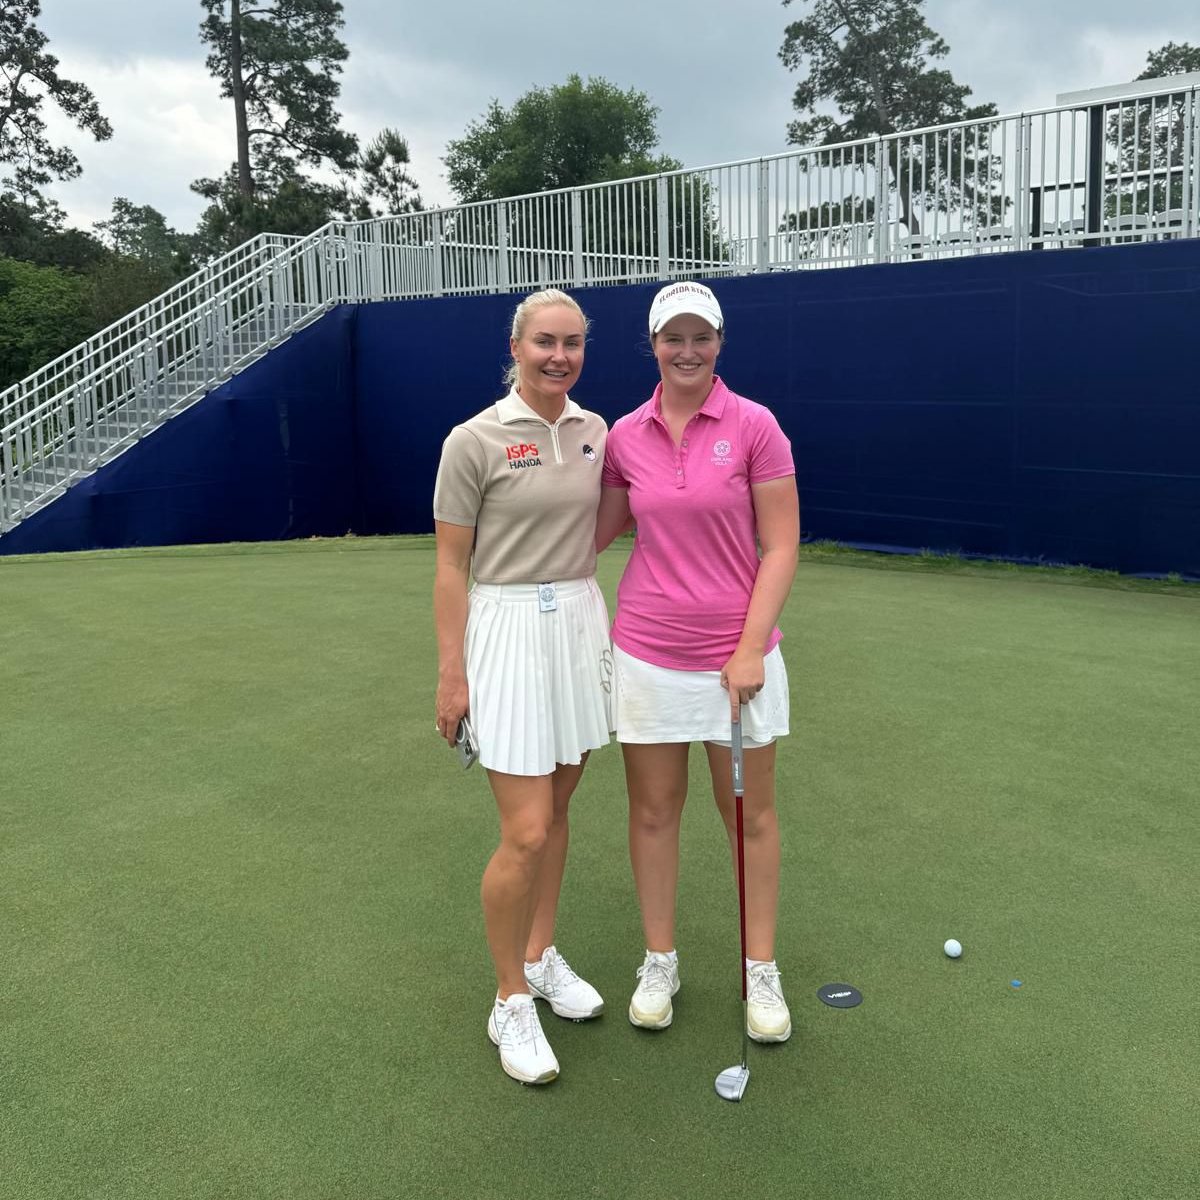 🥹 Just two England legends teeing it up at the @Chevron_Golf this week! Good luck @HullCharley & @LottieWoad! 🏴󠁧󠁢󠁥󠁮󠁧󠁿 It's a first major for Lottie who qualified following victory in the @anwagolf 👏 #TheChevronChampionship #RespectInGolf #TogetherInGolf